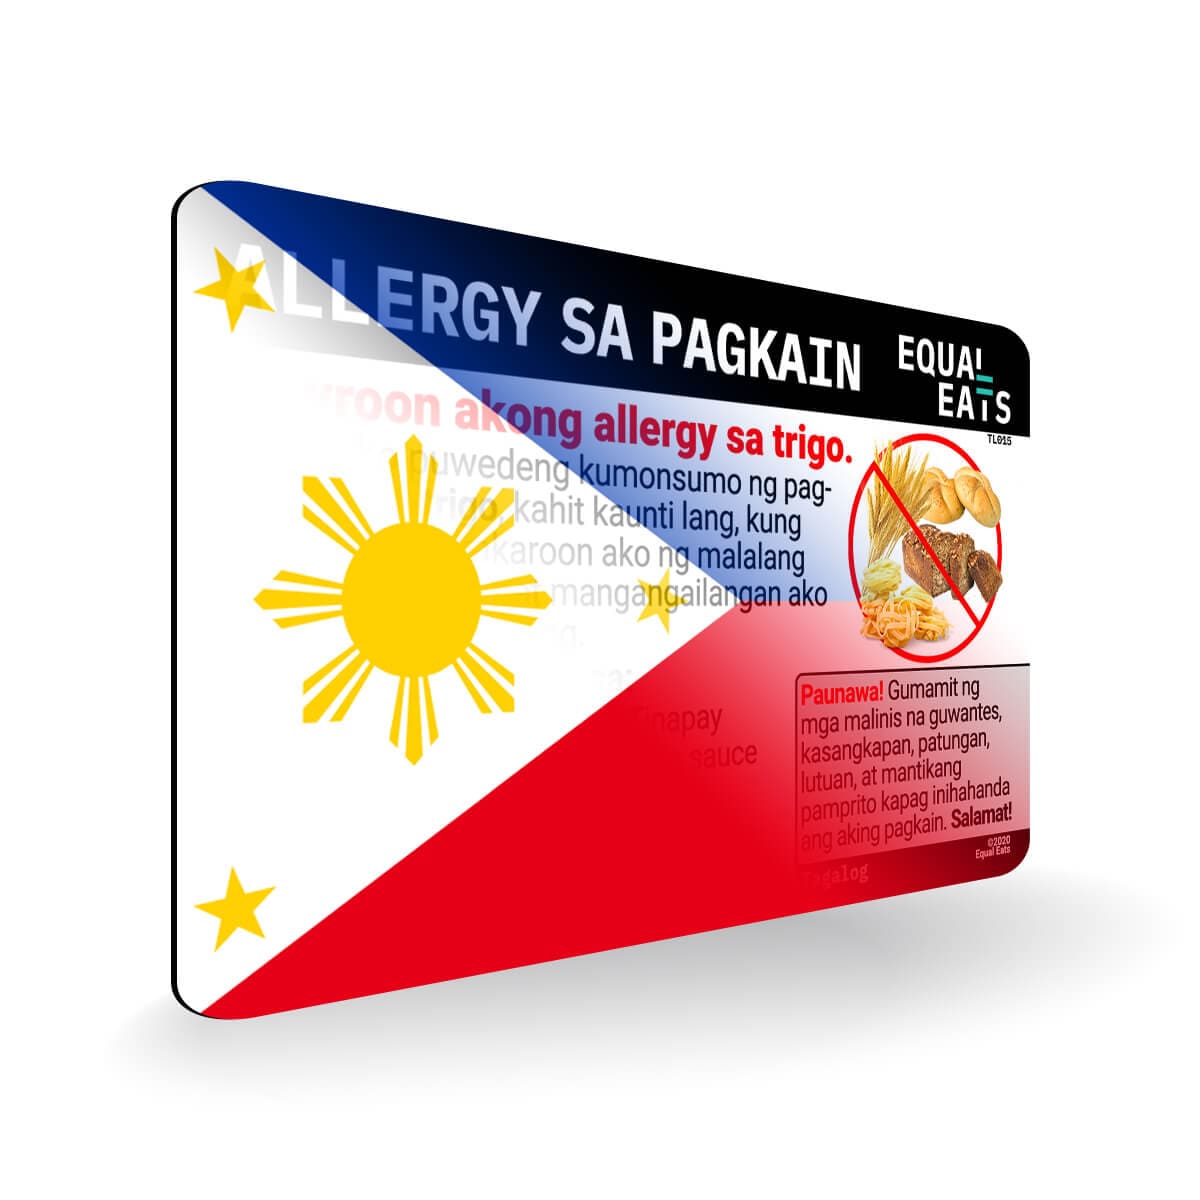 Wheat Allergy in Tagalog. Wheat Allergy Card for Philippines